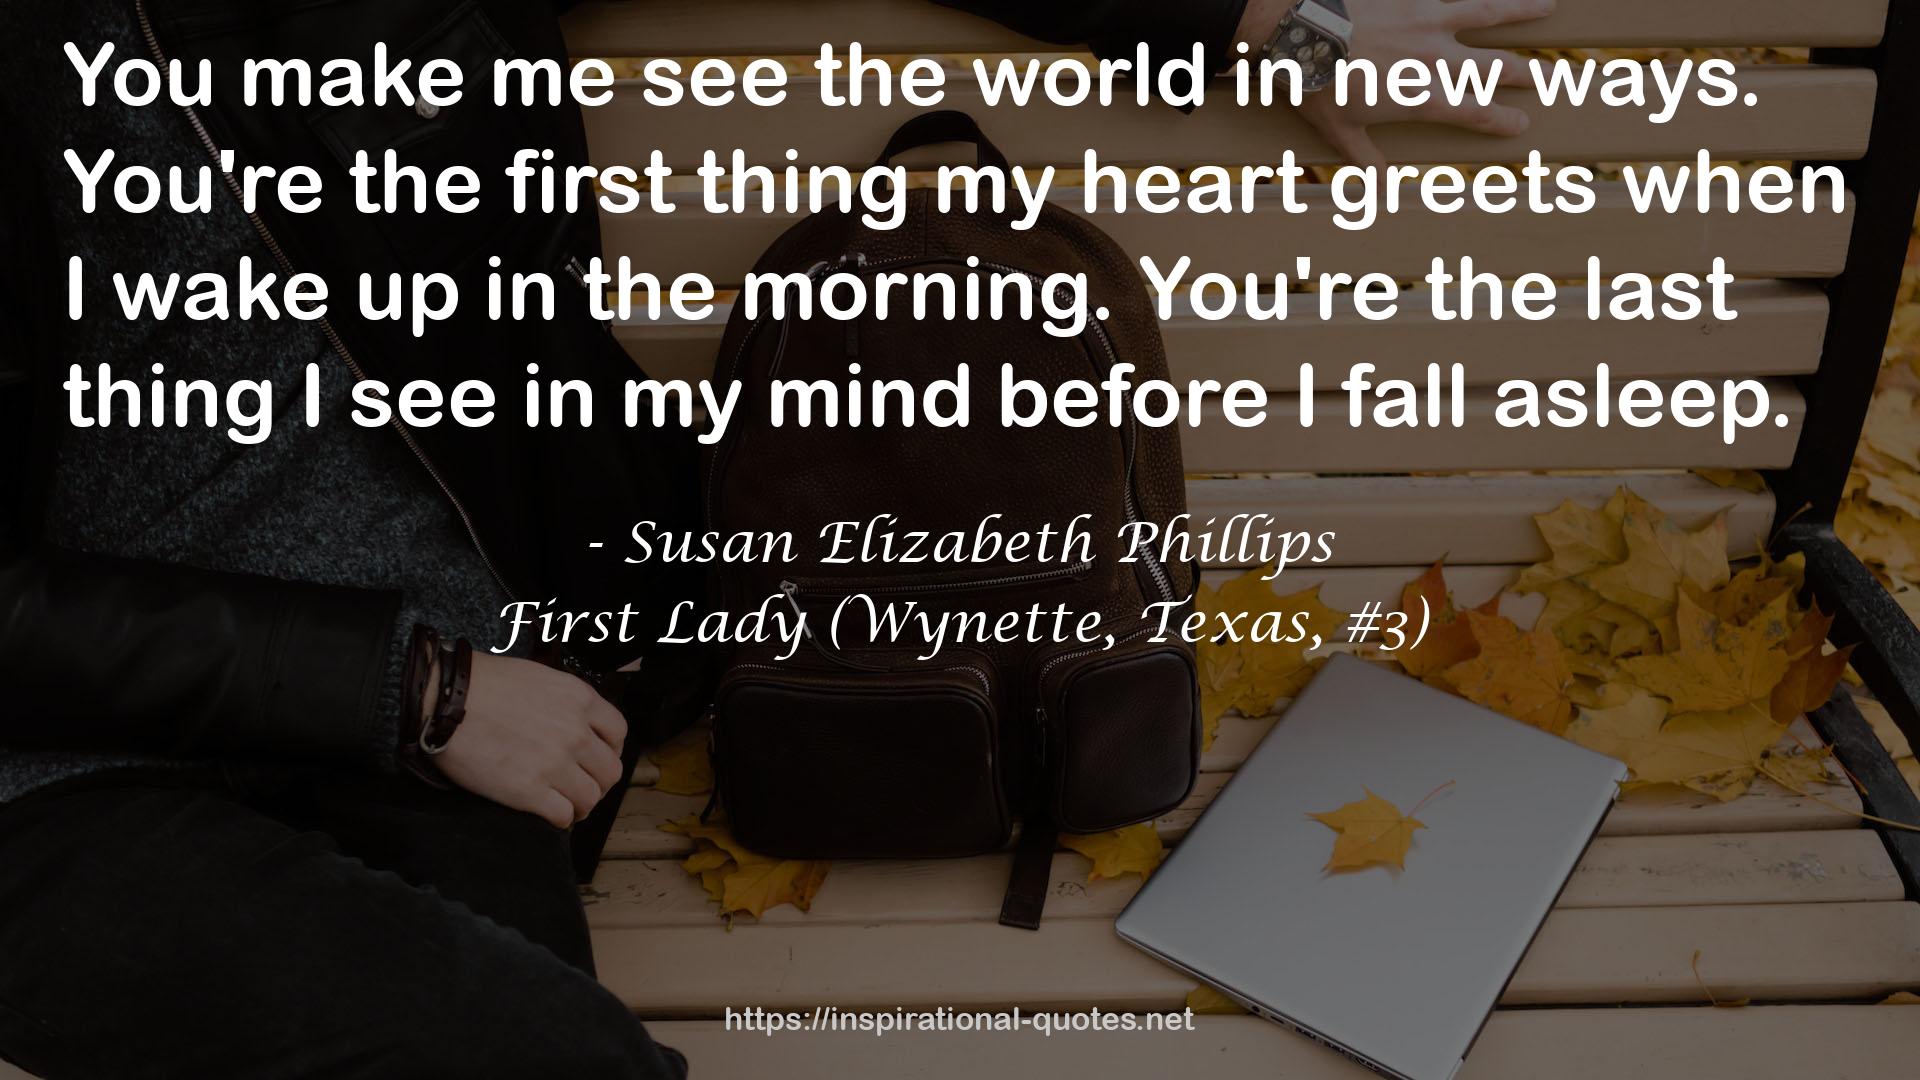 First Lady (Wynette, Texas, #3) QUOTES